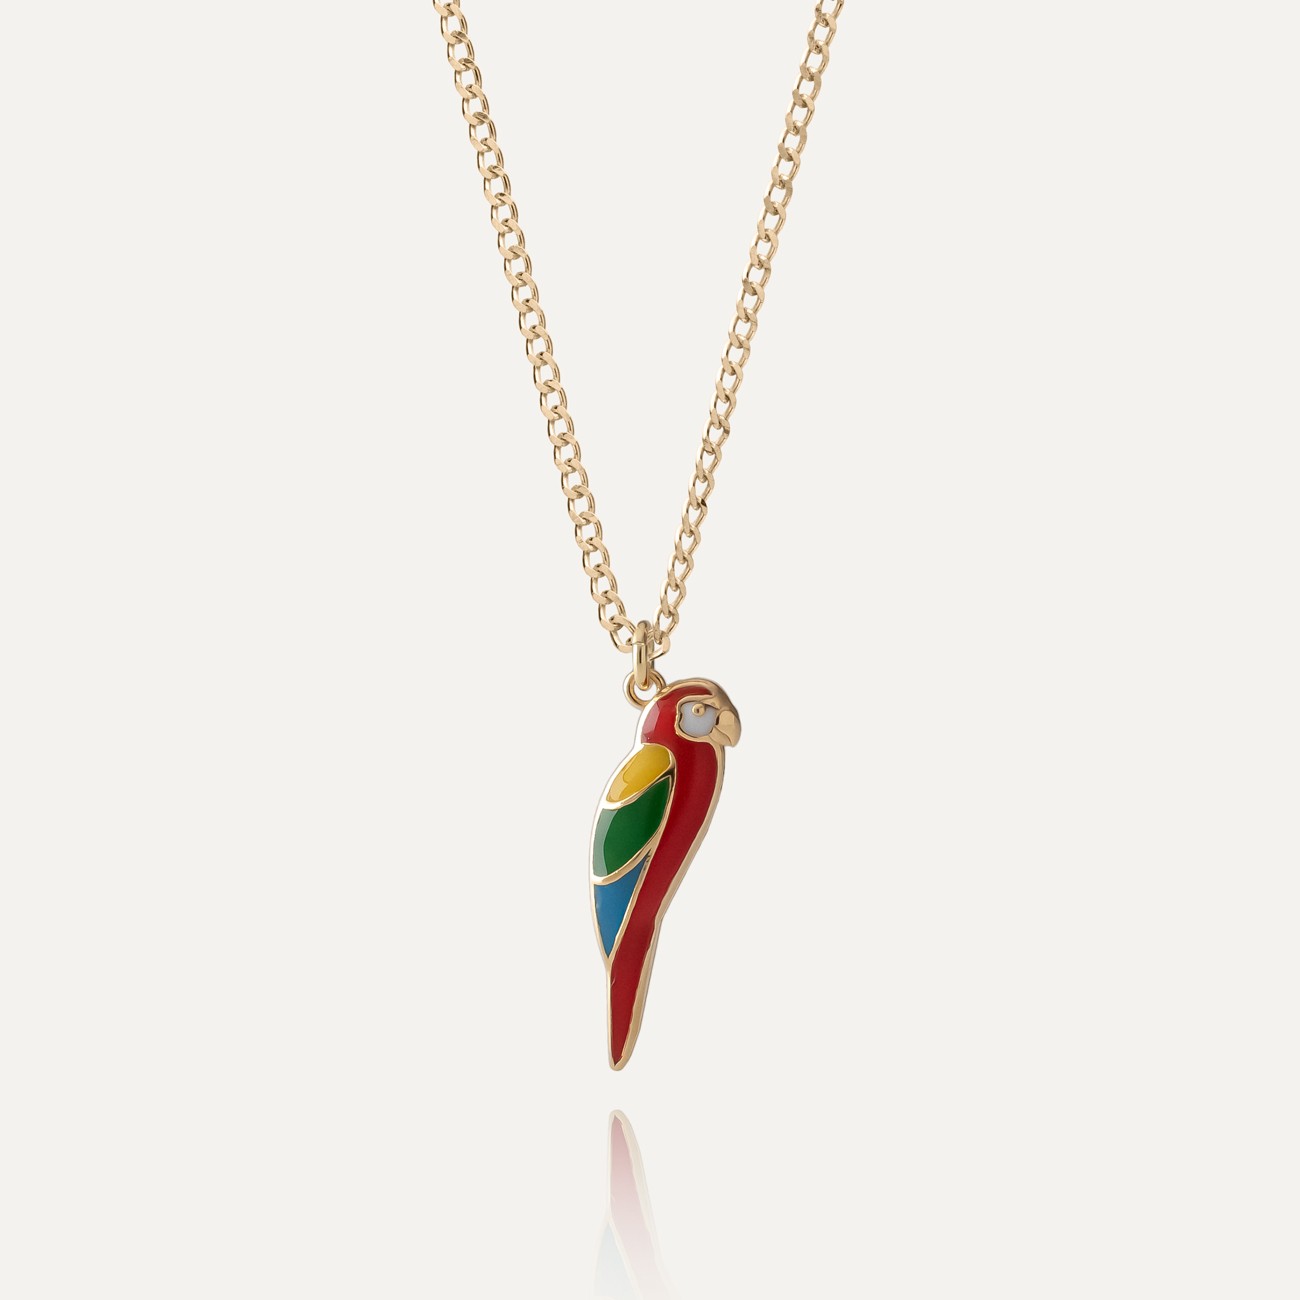 Parrot necklace, sterling silver 925